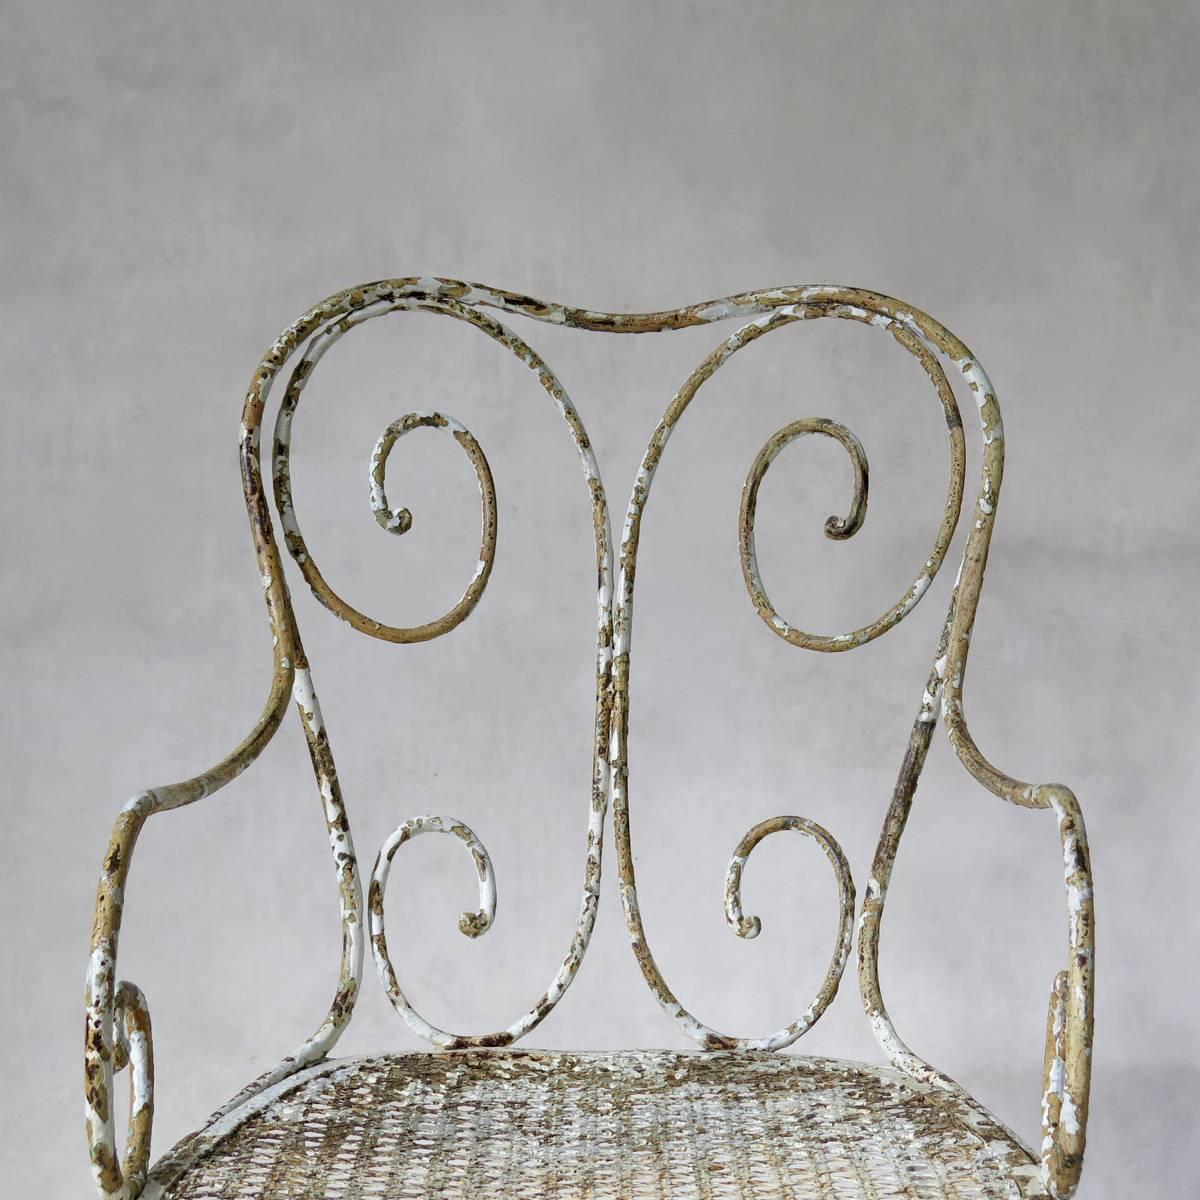 20th Century Large Wrought Iron Chair, France, circa 1900